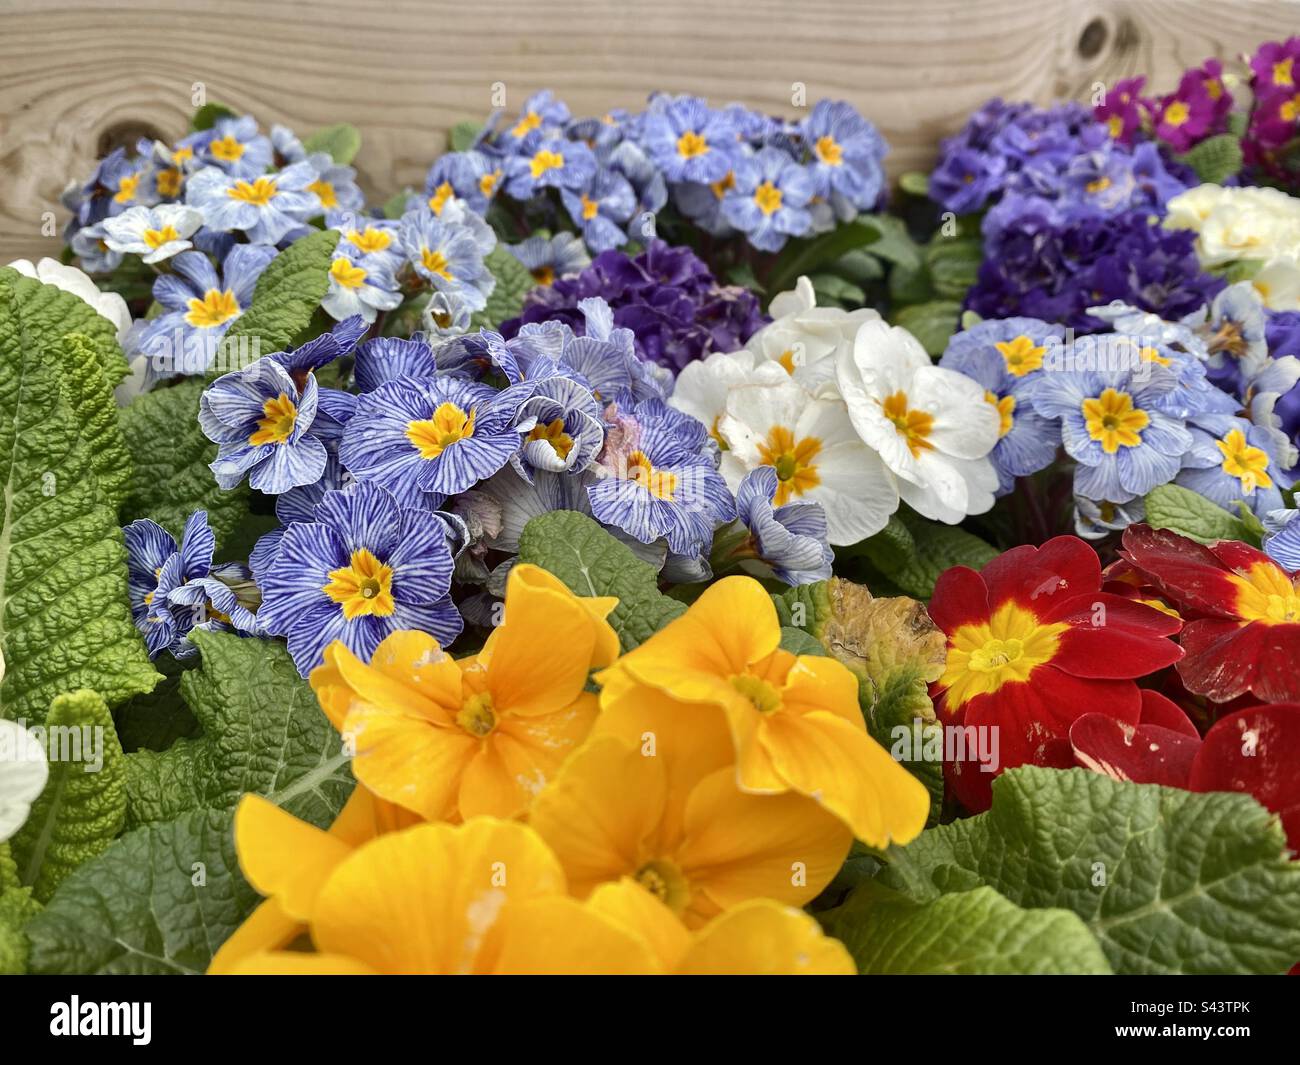 Primula flowers in bloom Stock Photo